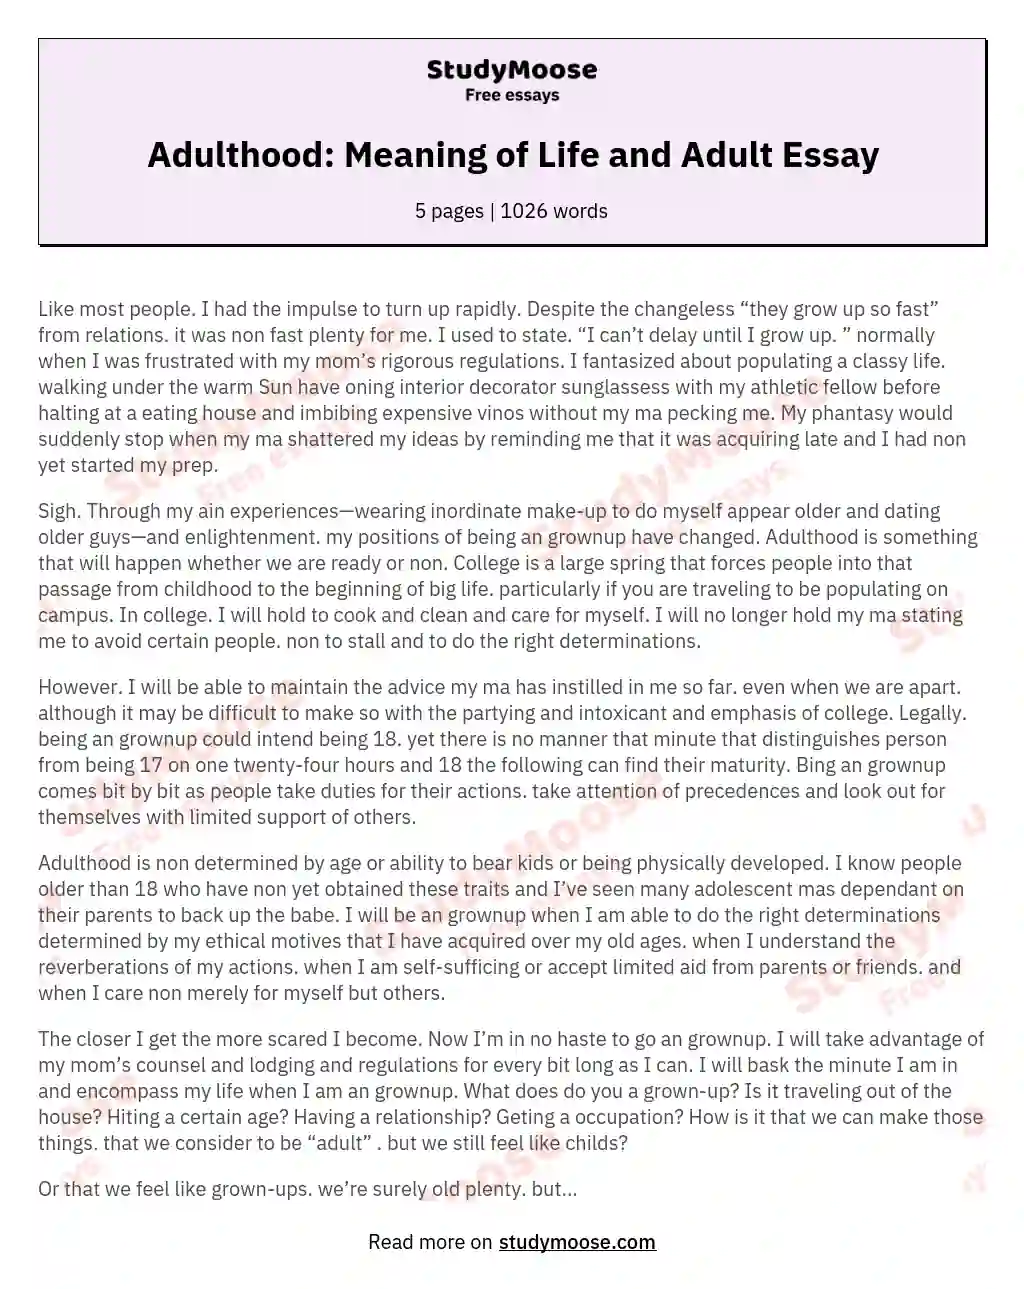 Adulthood: Meaning of Life and Adult Essay